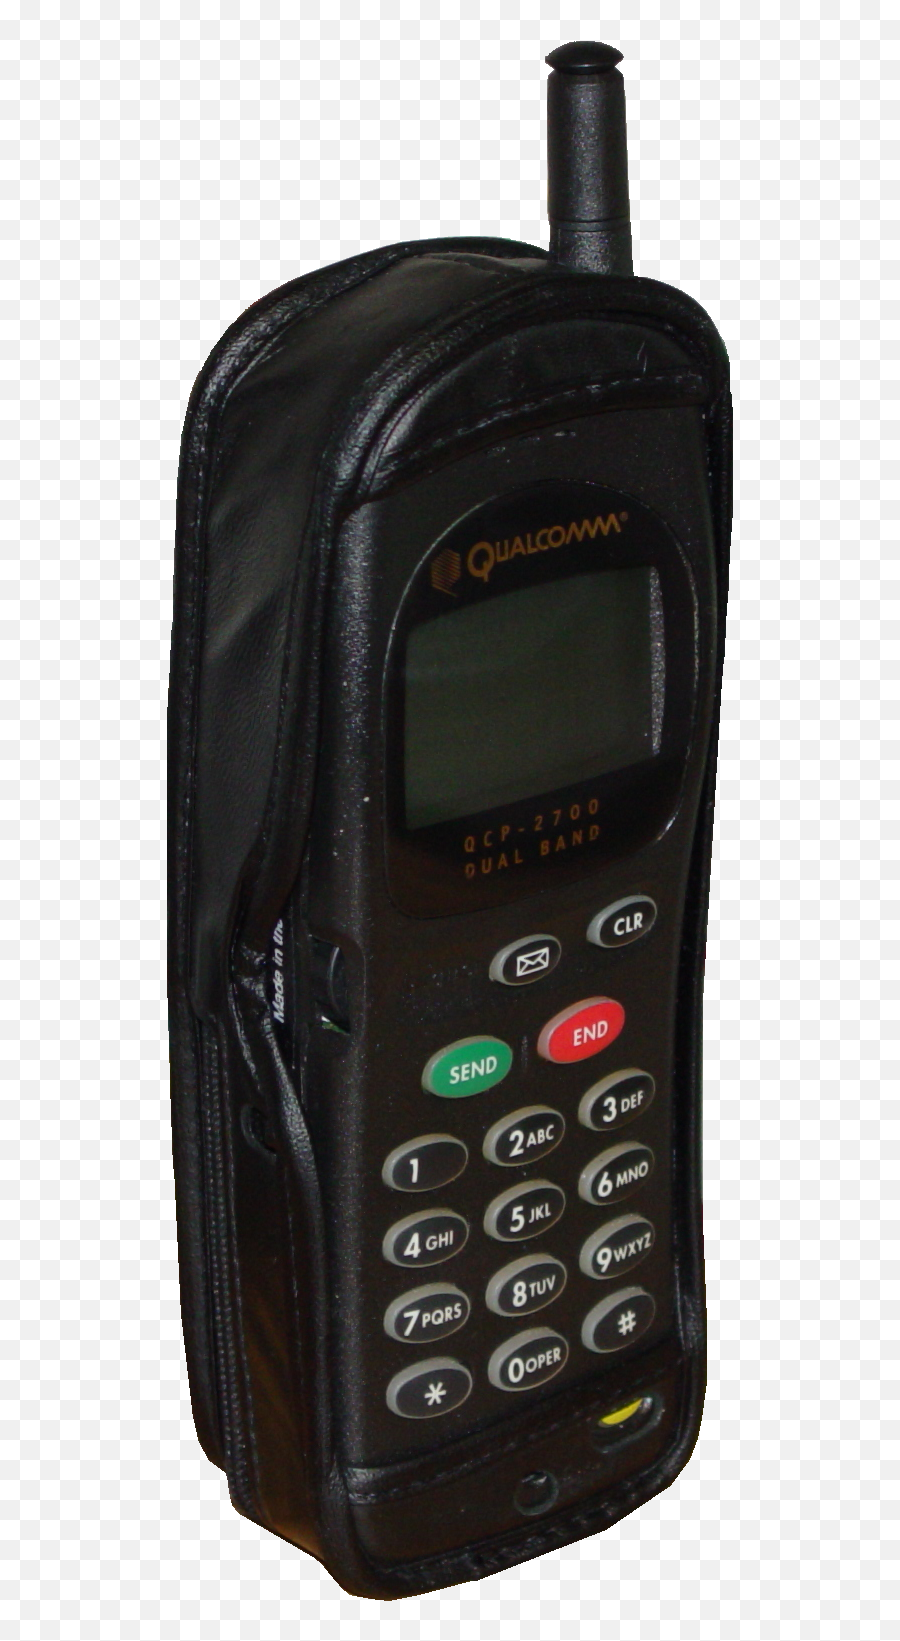 Filequalcomm Qcp - 2700 Phonepng Wikimedia Commons Emoji,Cellphone Png